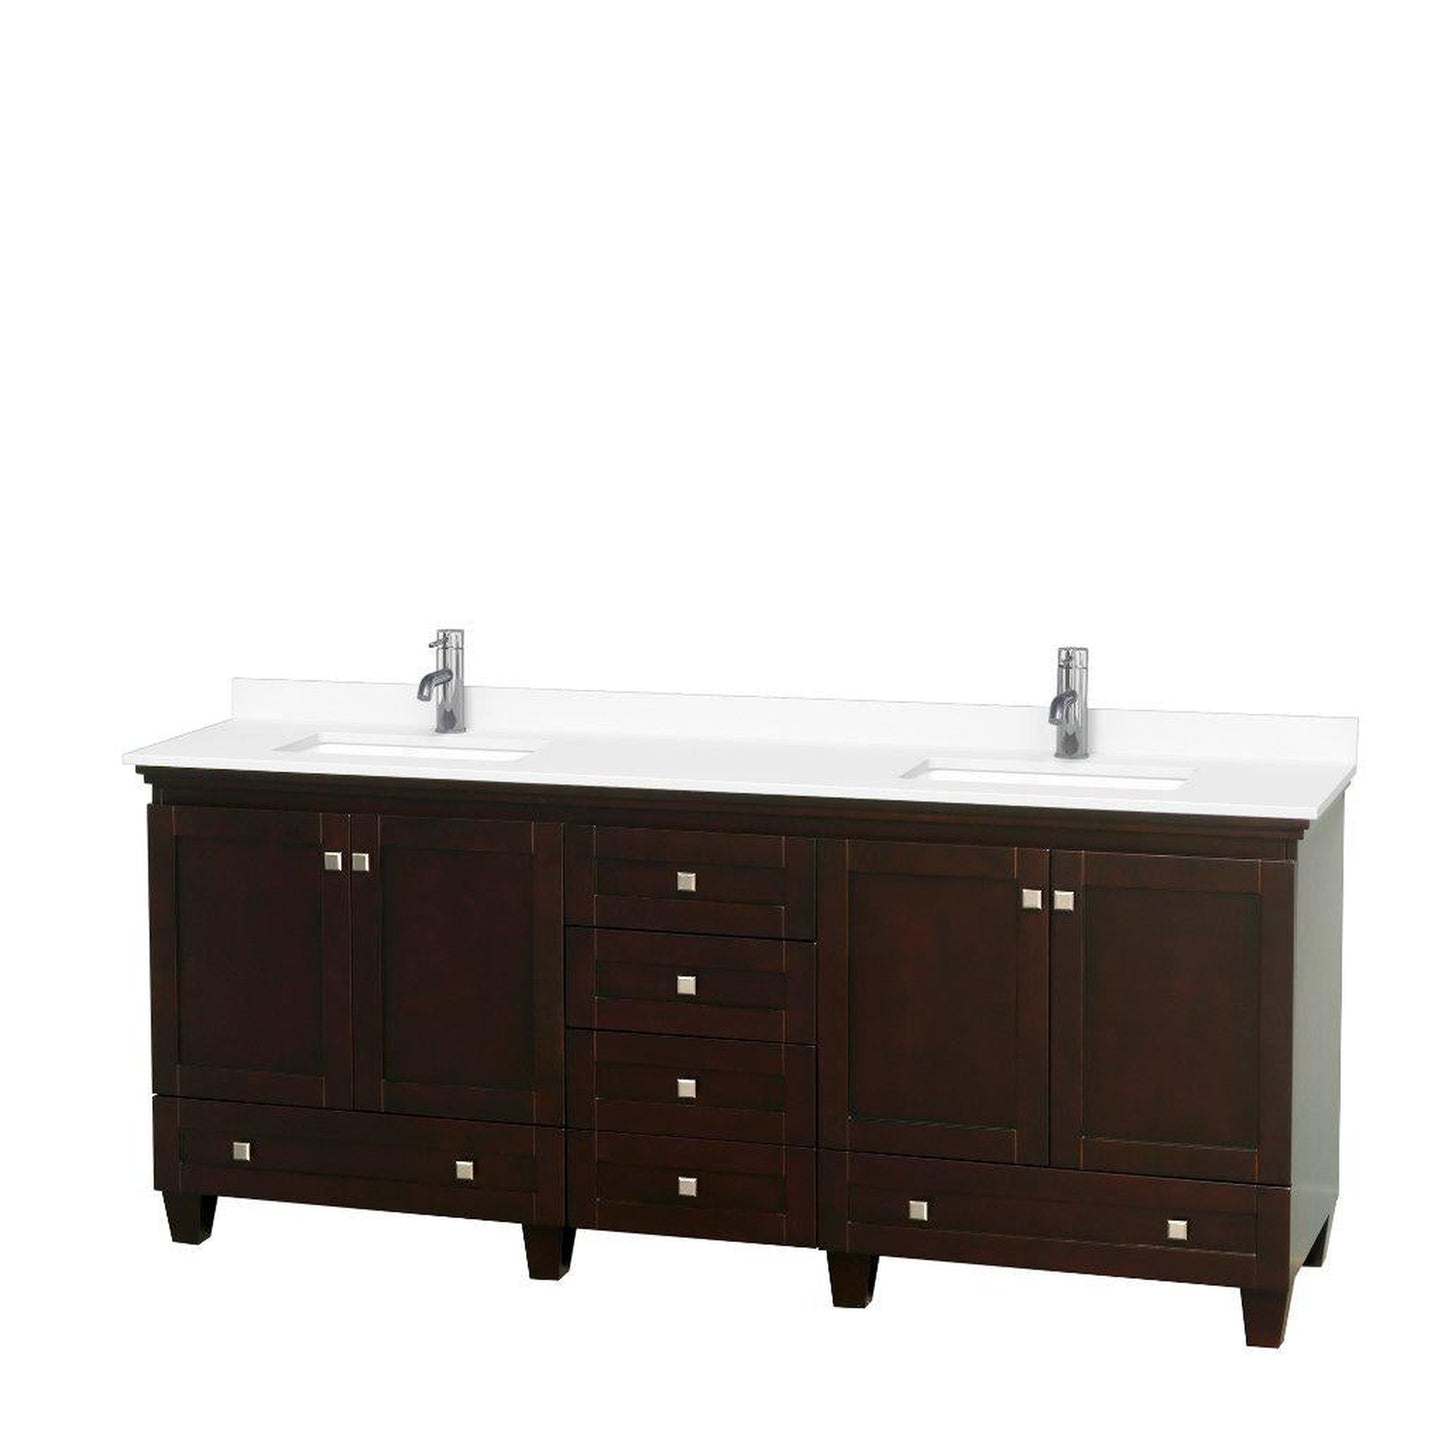 Wyndham Collection Acclaim 80" Double Bathroom Espresso Vanity With White Cultured Marble Countertop And Undermount Square Sinks